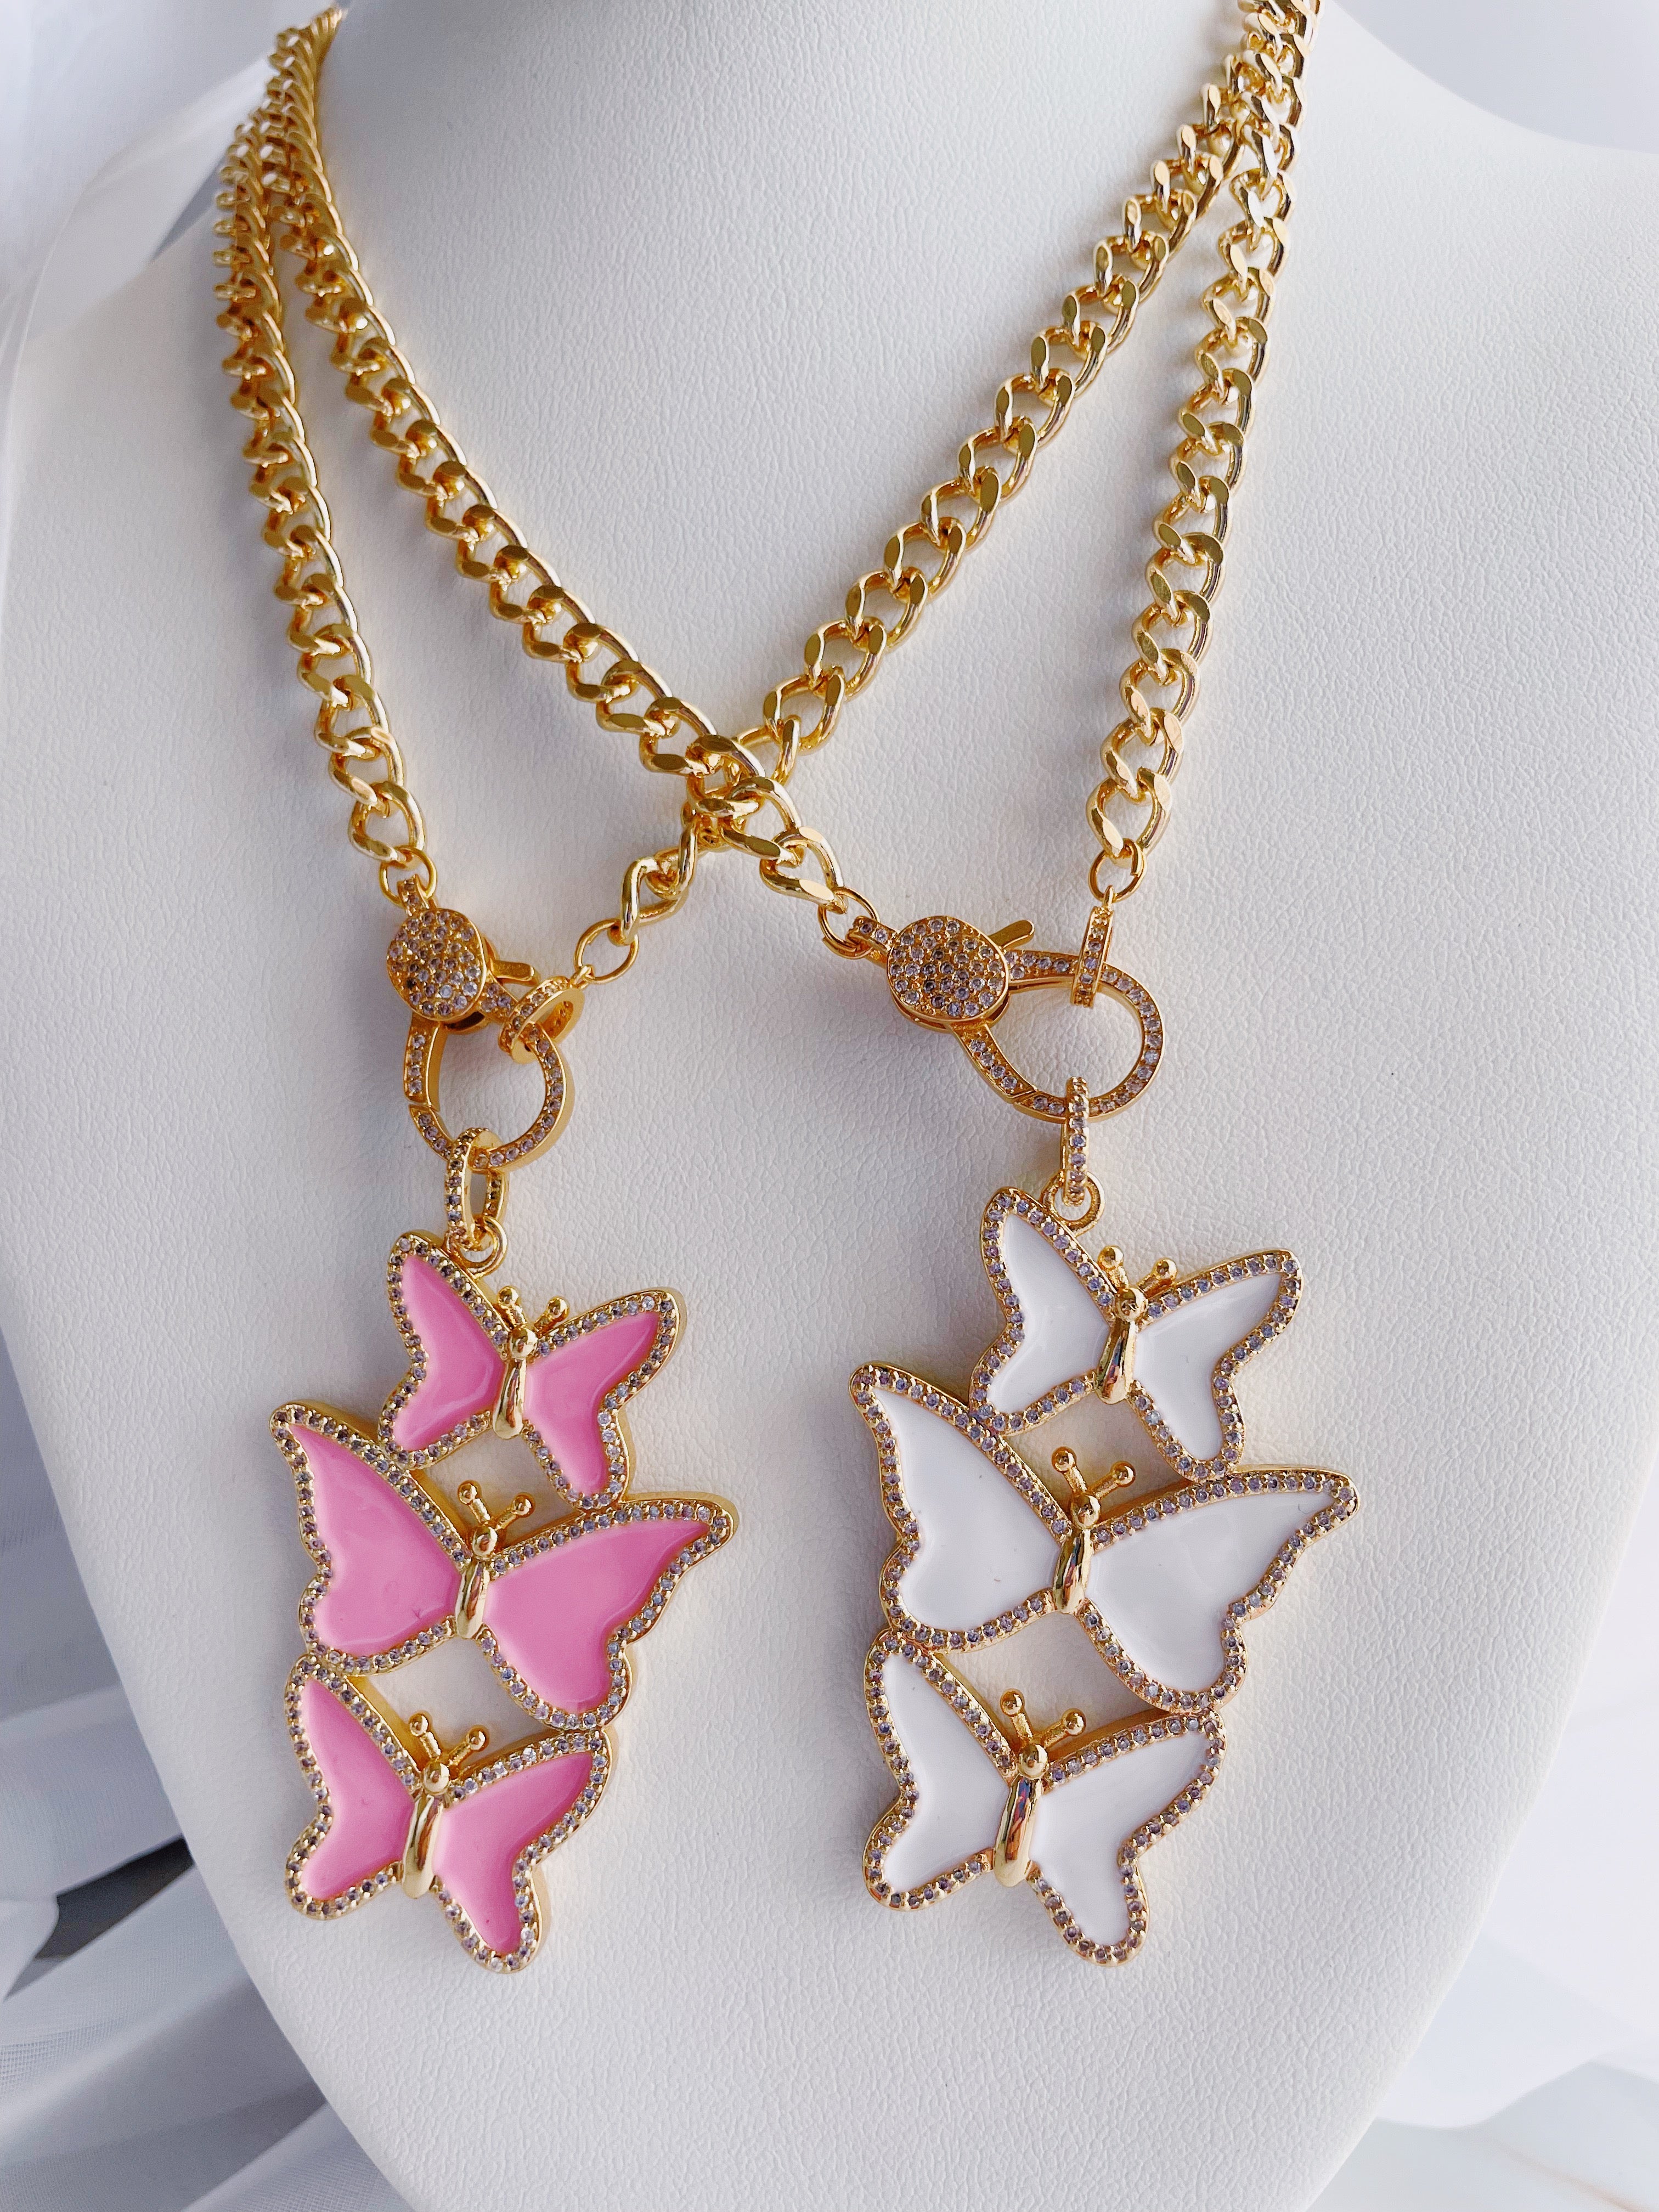 Triple butterfly charm necklace